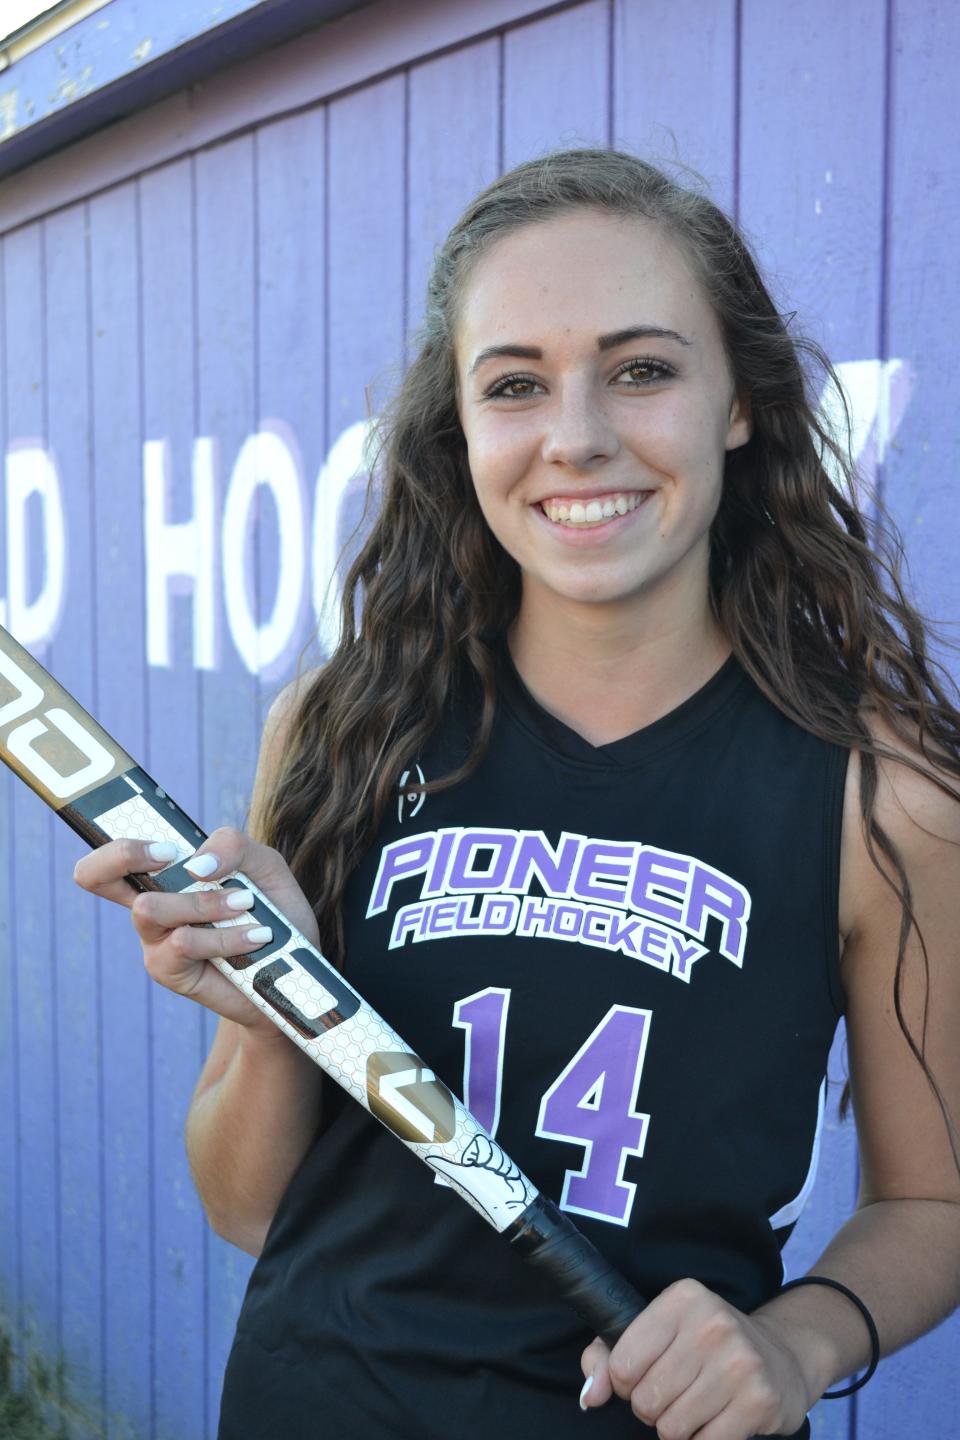 Among Quinn Moffett’s many high school activities, she played two sports: lacrosse and field hockey.